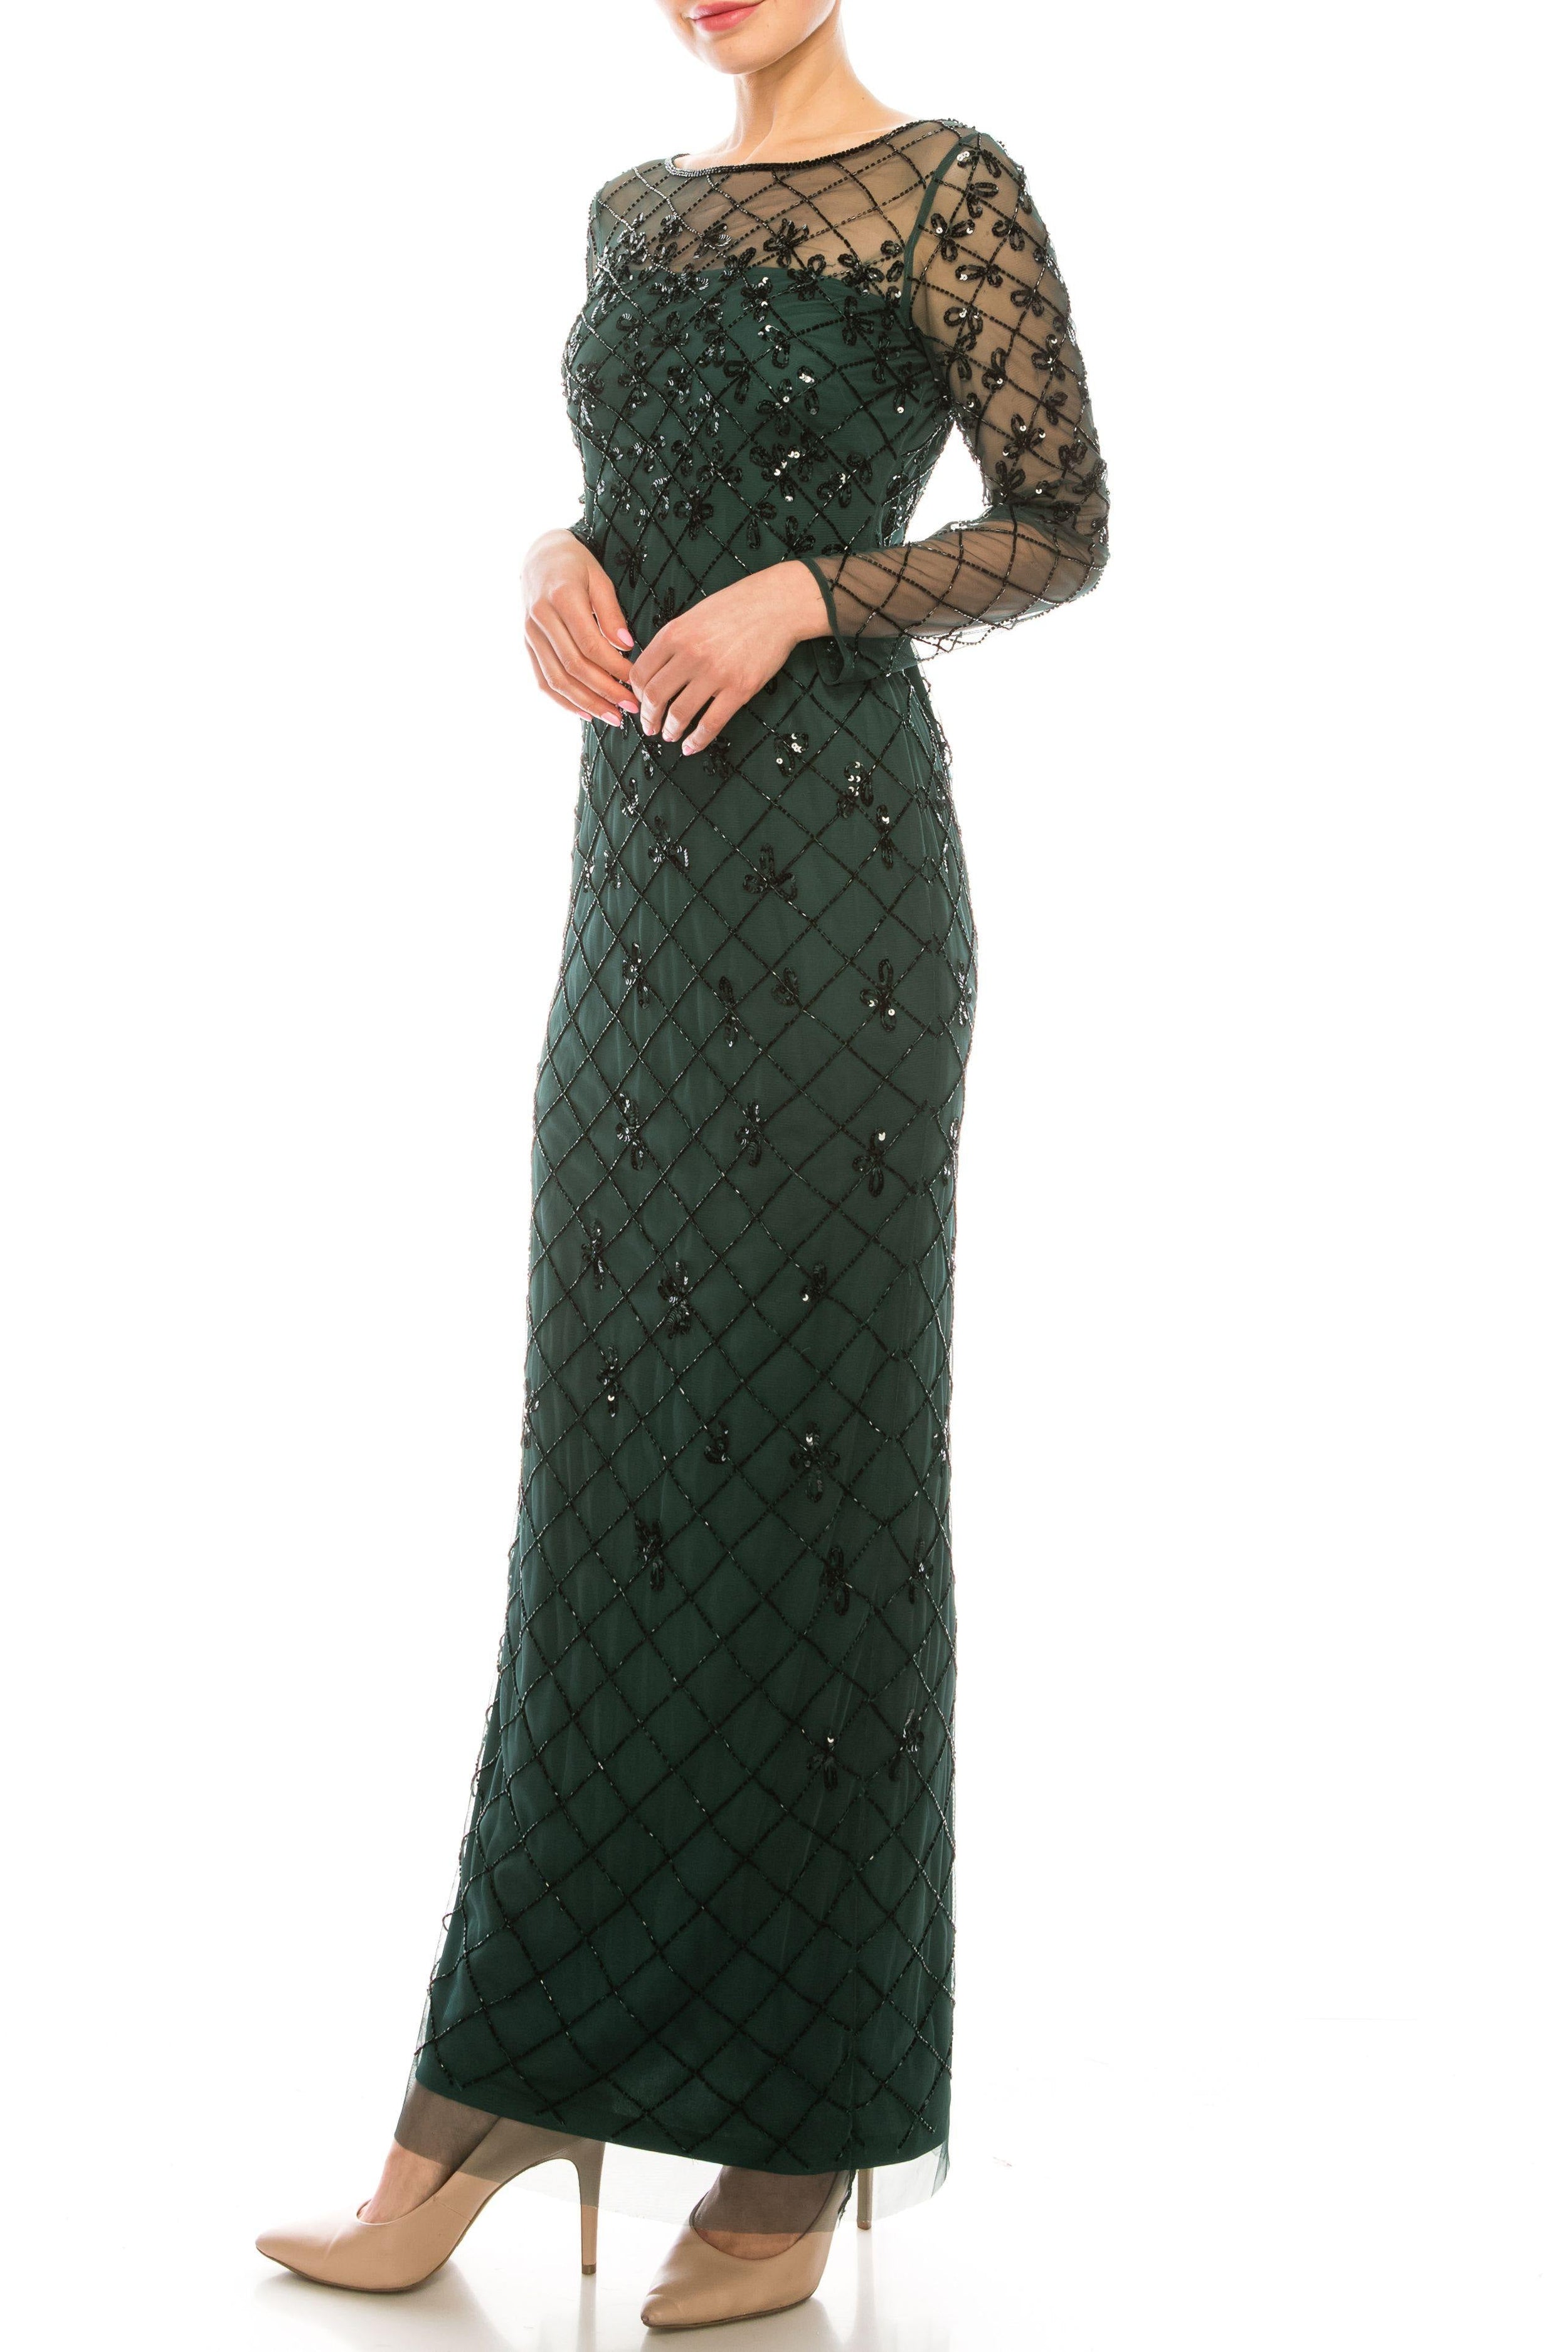 Adrianna Papell Long Formal Evening Gown AP1E206544 - The Dress Outlet